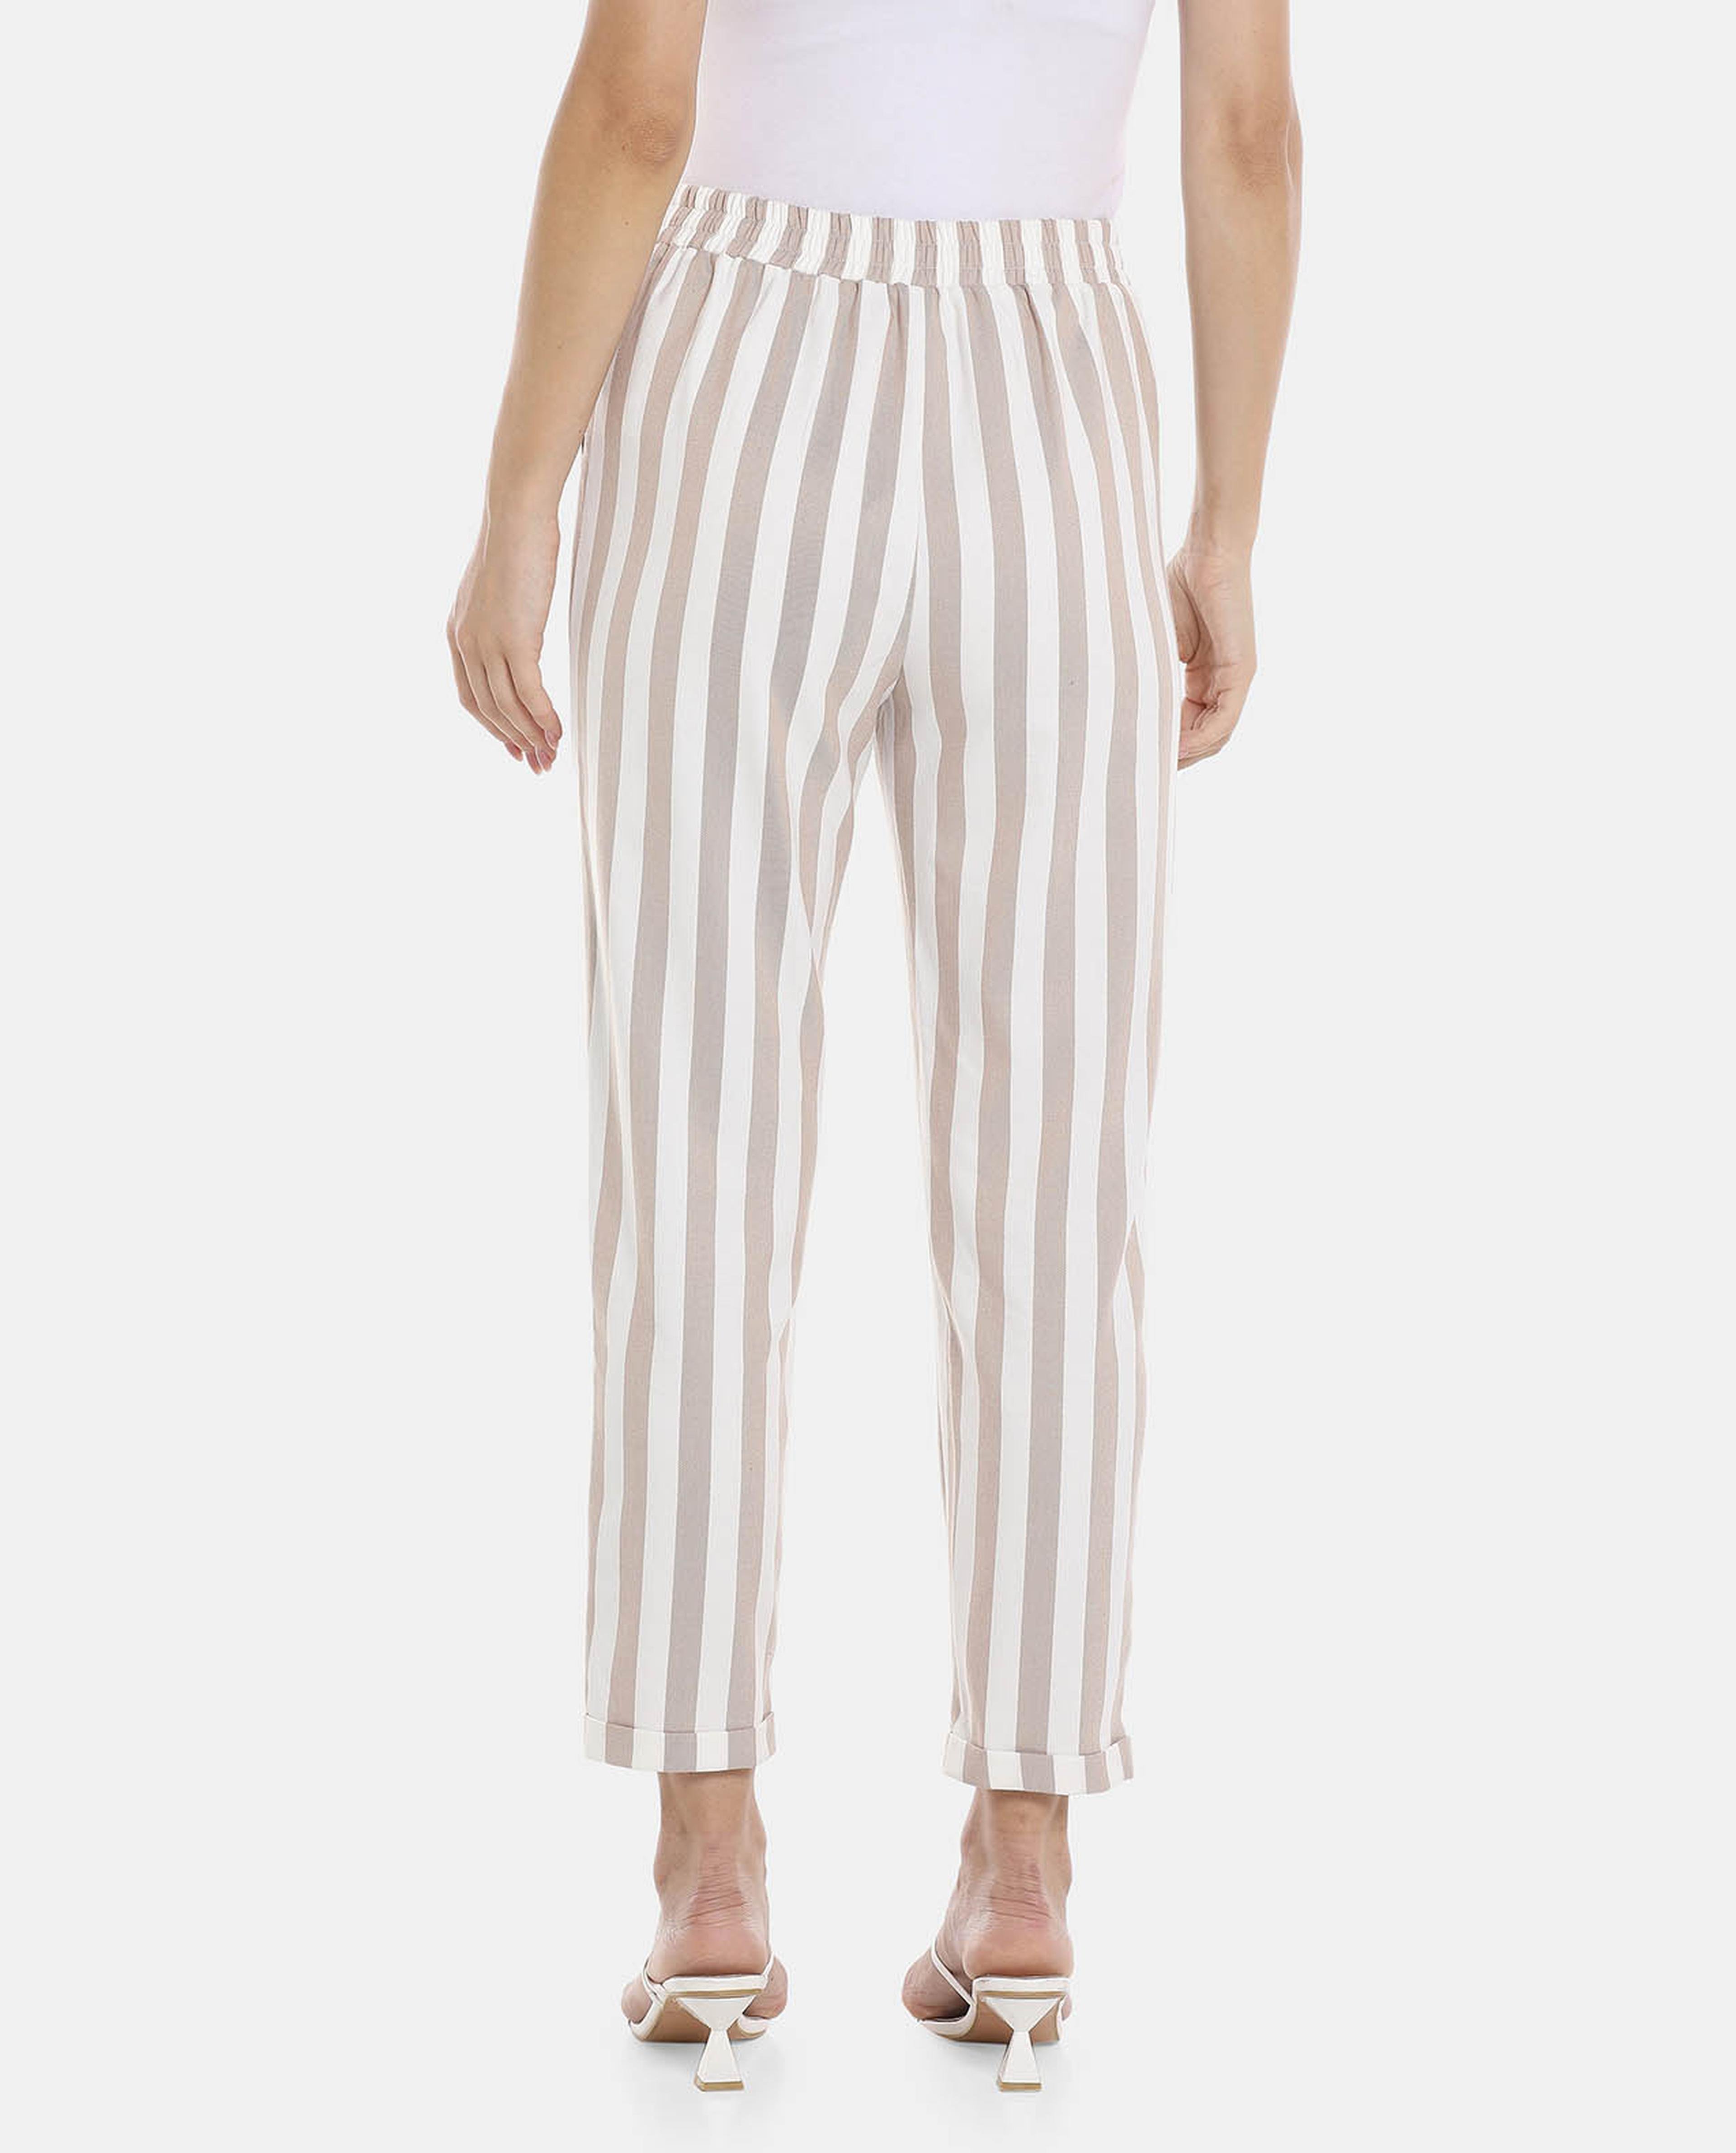 Striped Ankle Length Pants